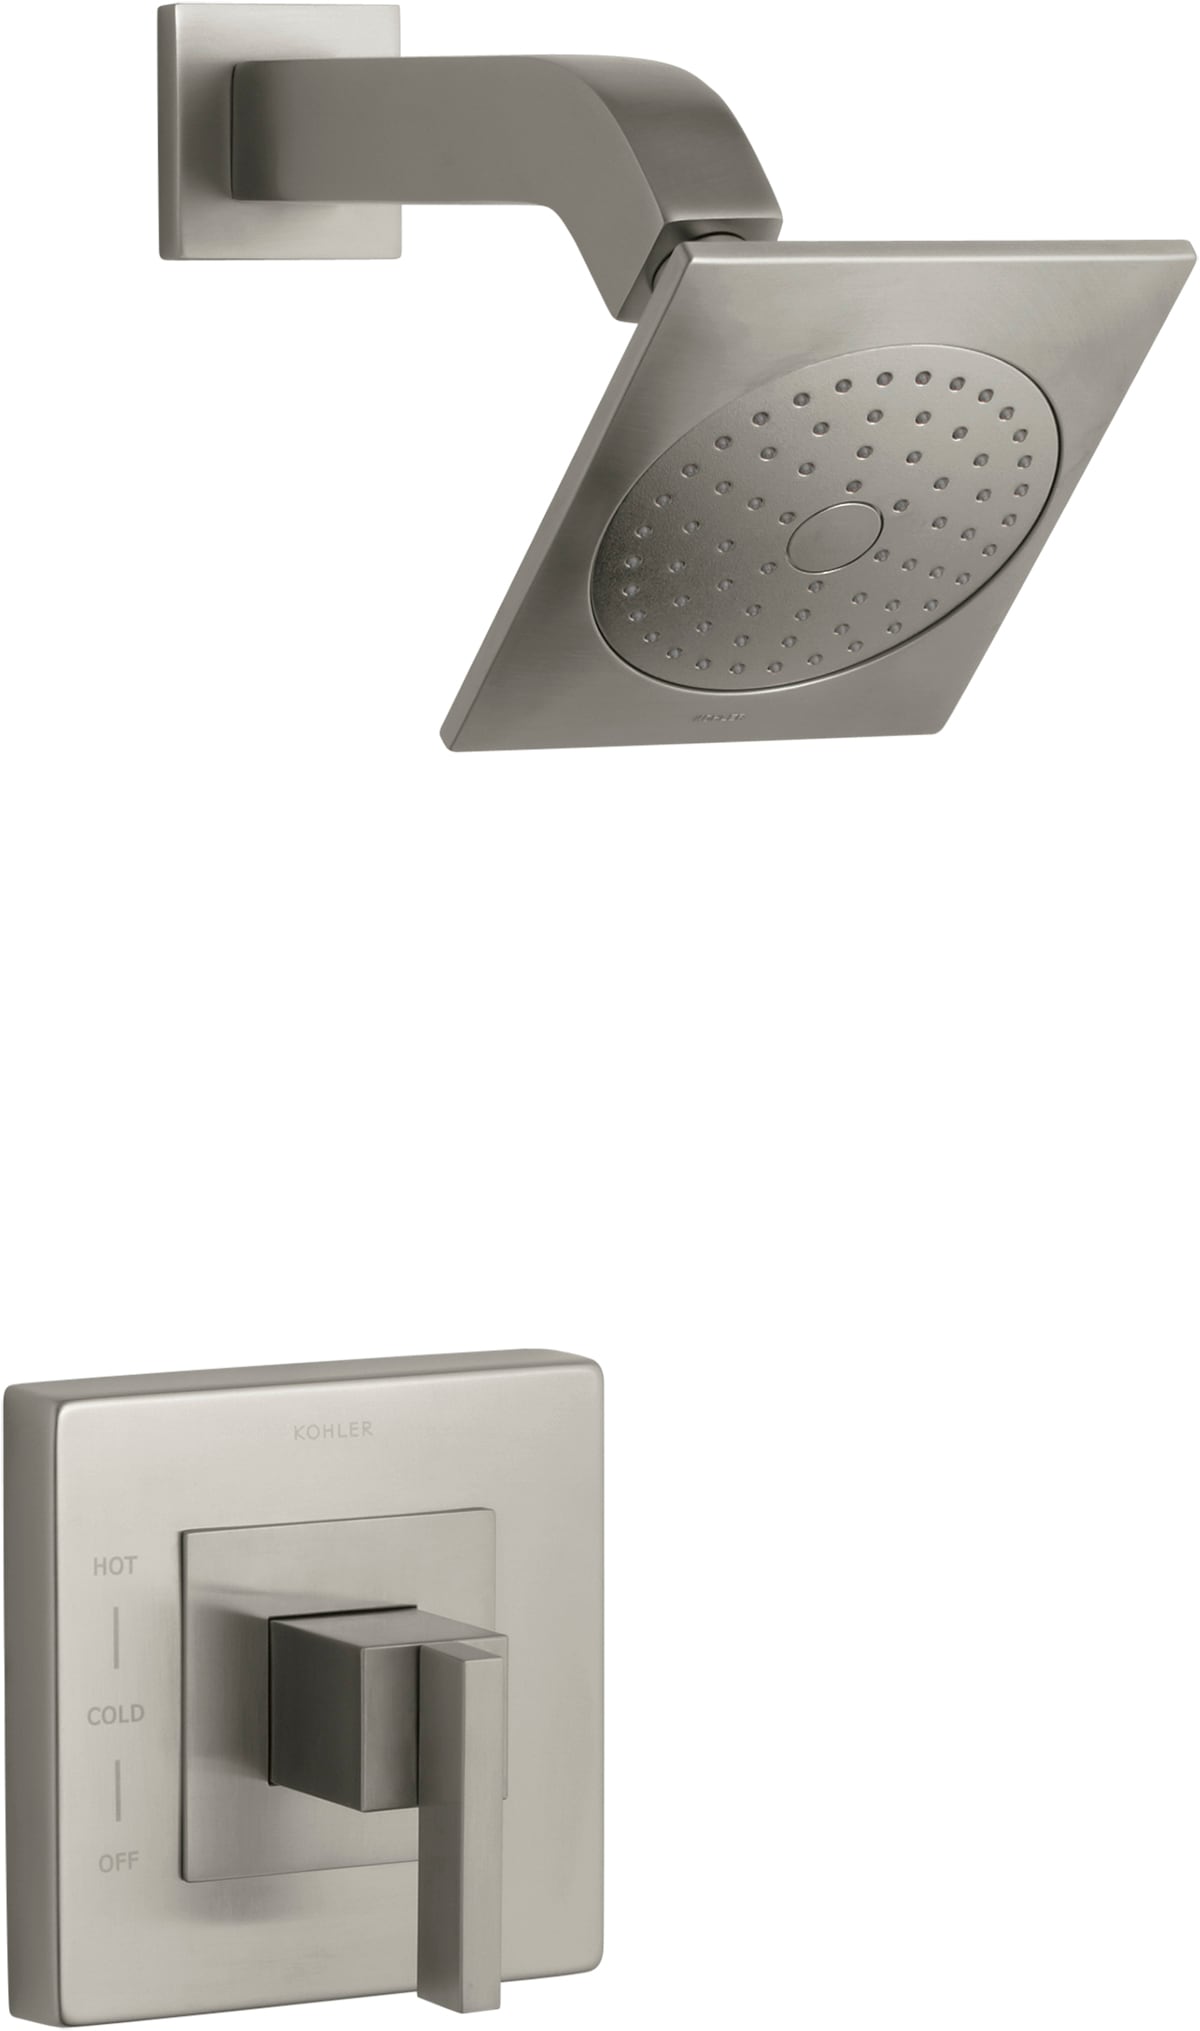 Loure Bathroom Faucets  Shower Heads at